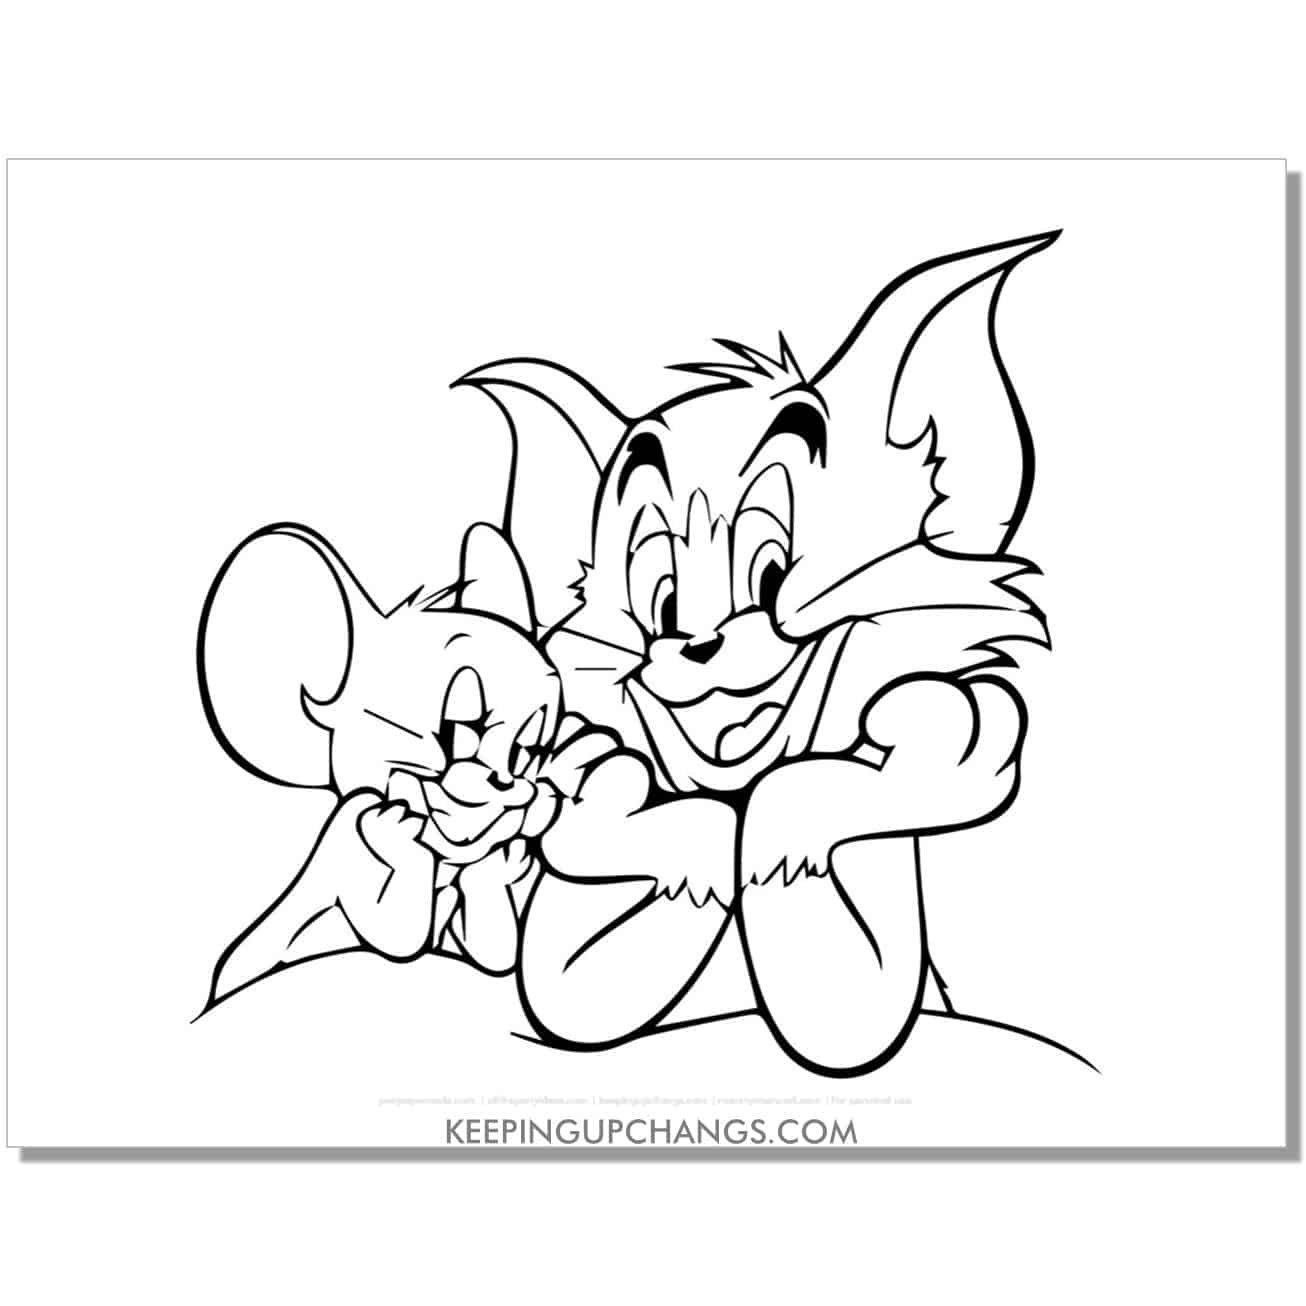 free tom and jerry with head in hands, leaning on elbows coloring page.